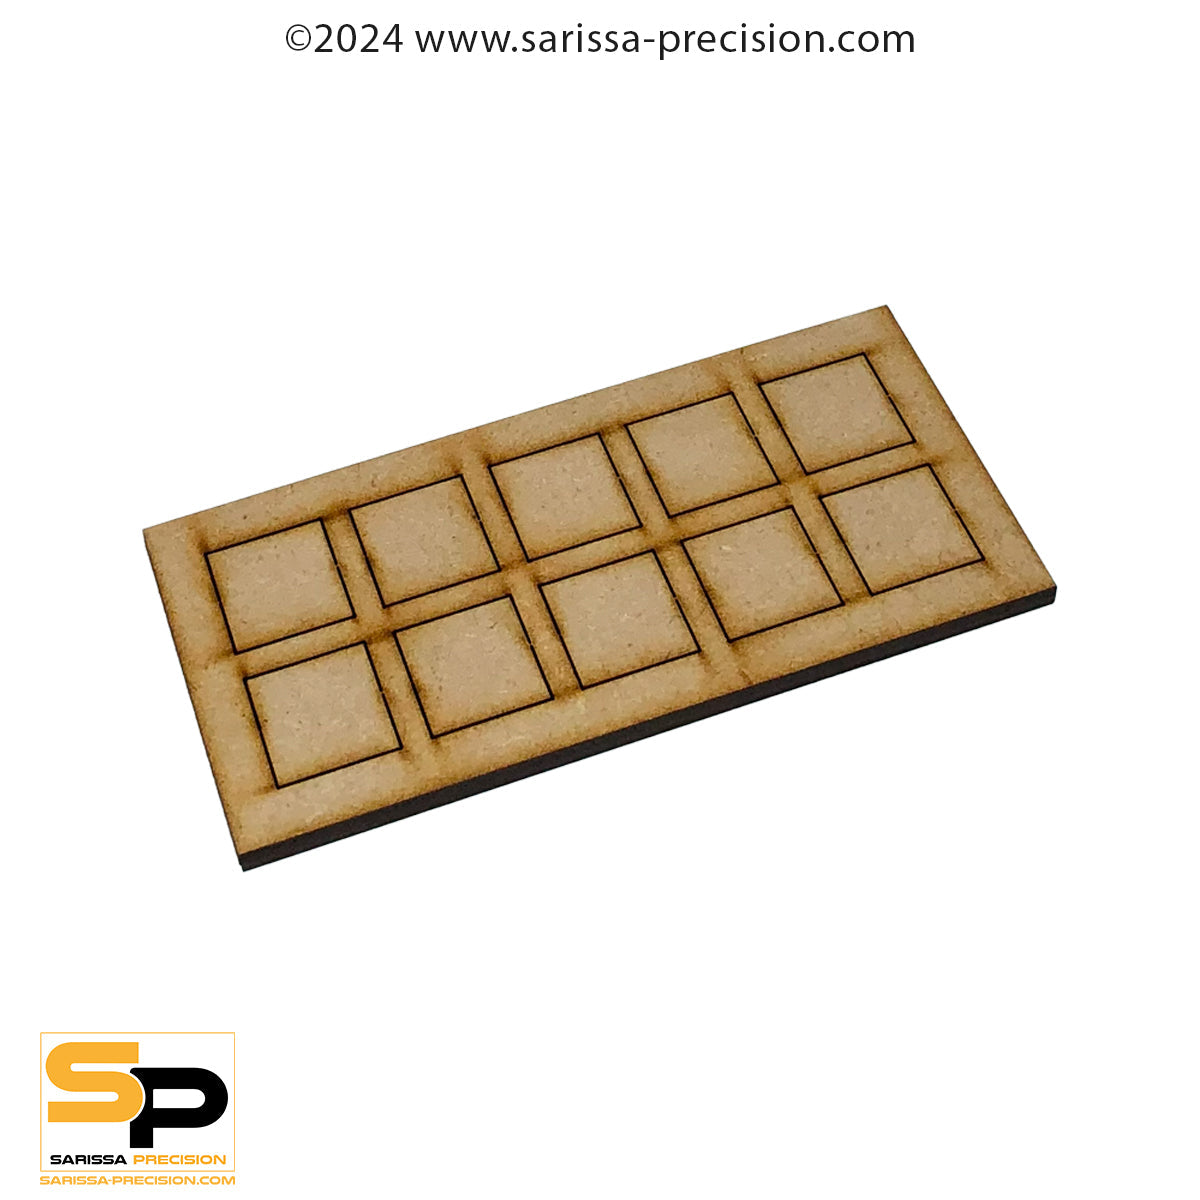 6x1 25x25mm Conversion Tray for 20x20mm bases